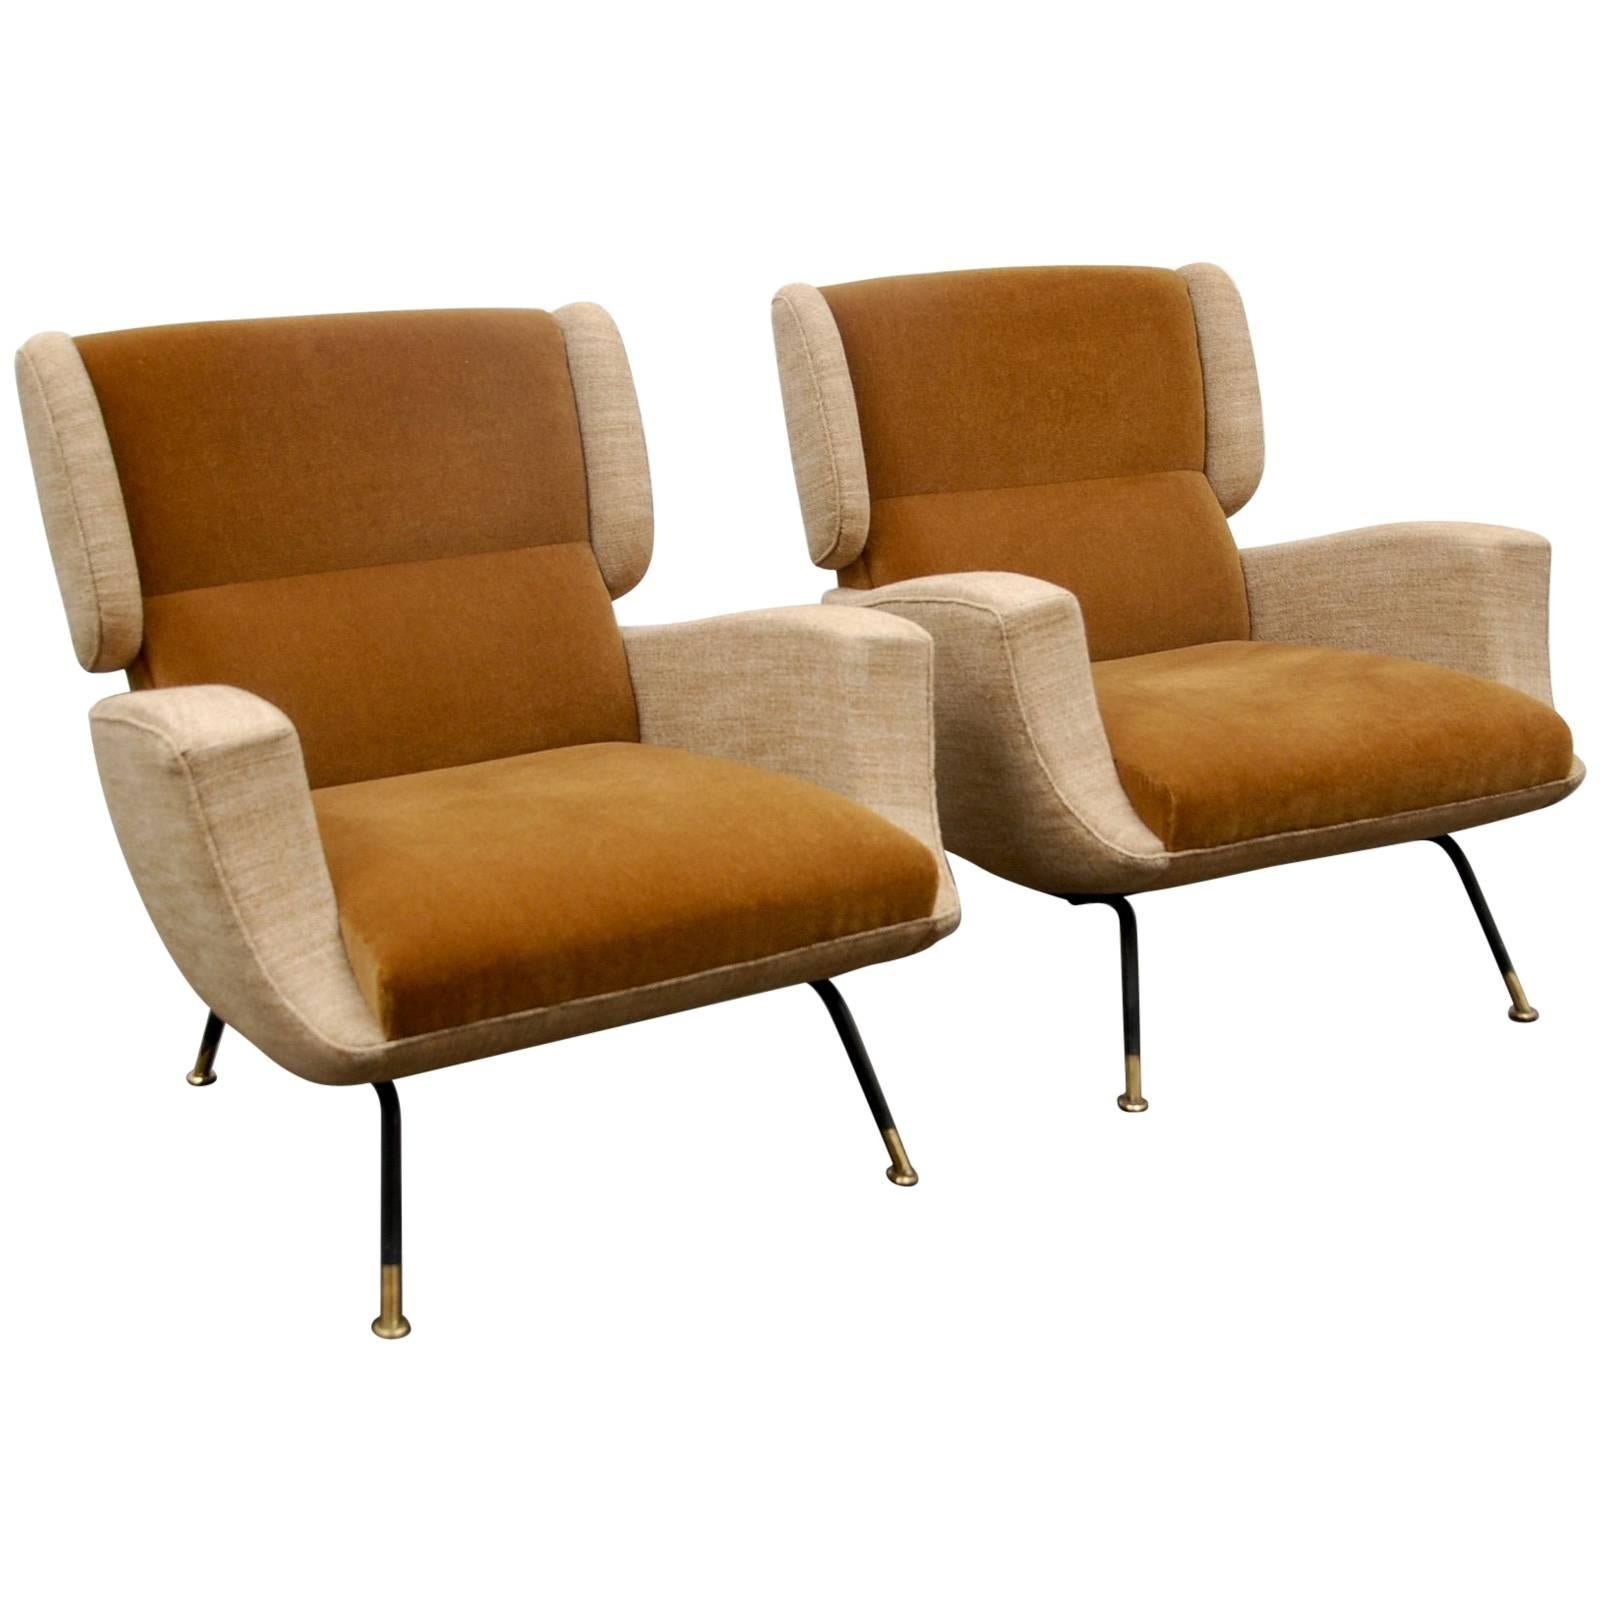 Pair of Seats, Italy 1950s For Sale